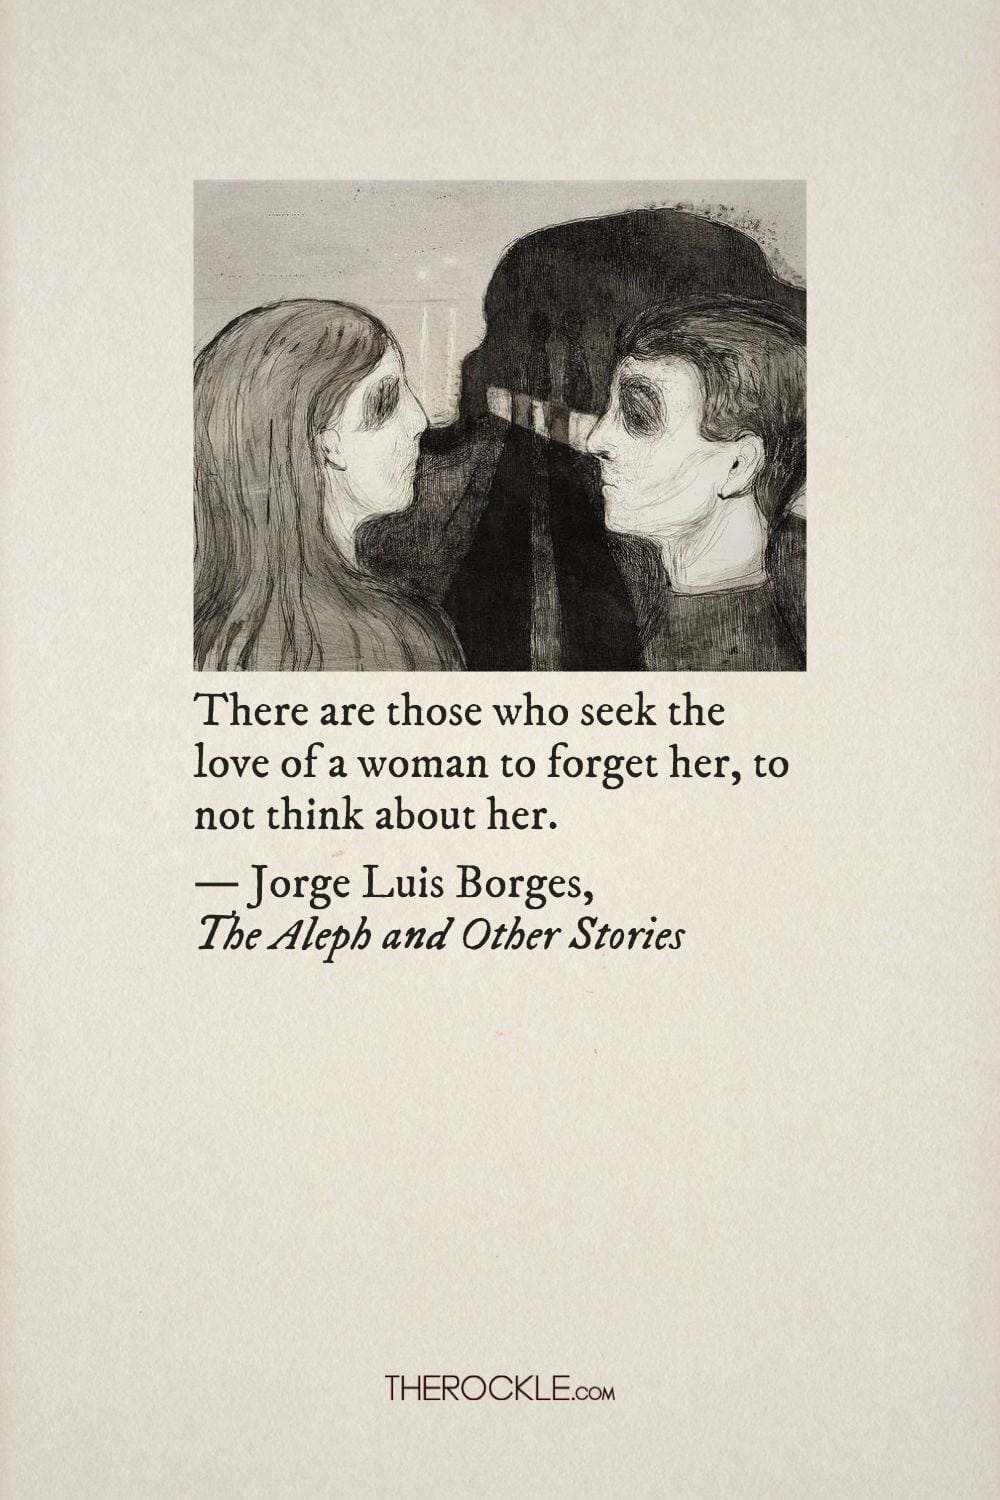 Borges on love as a distraction